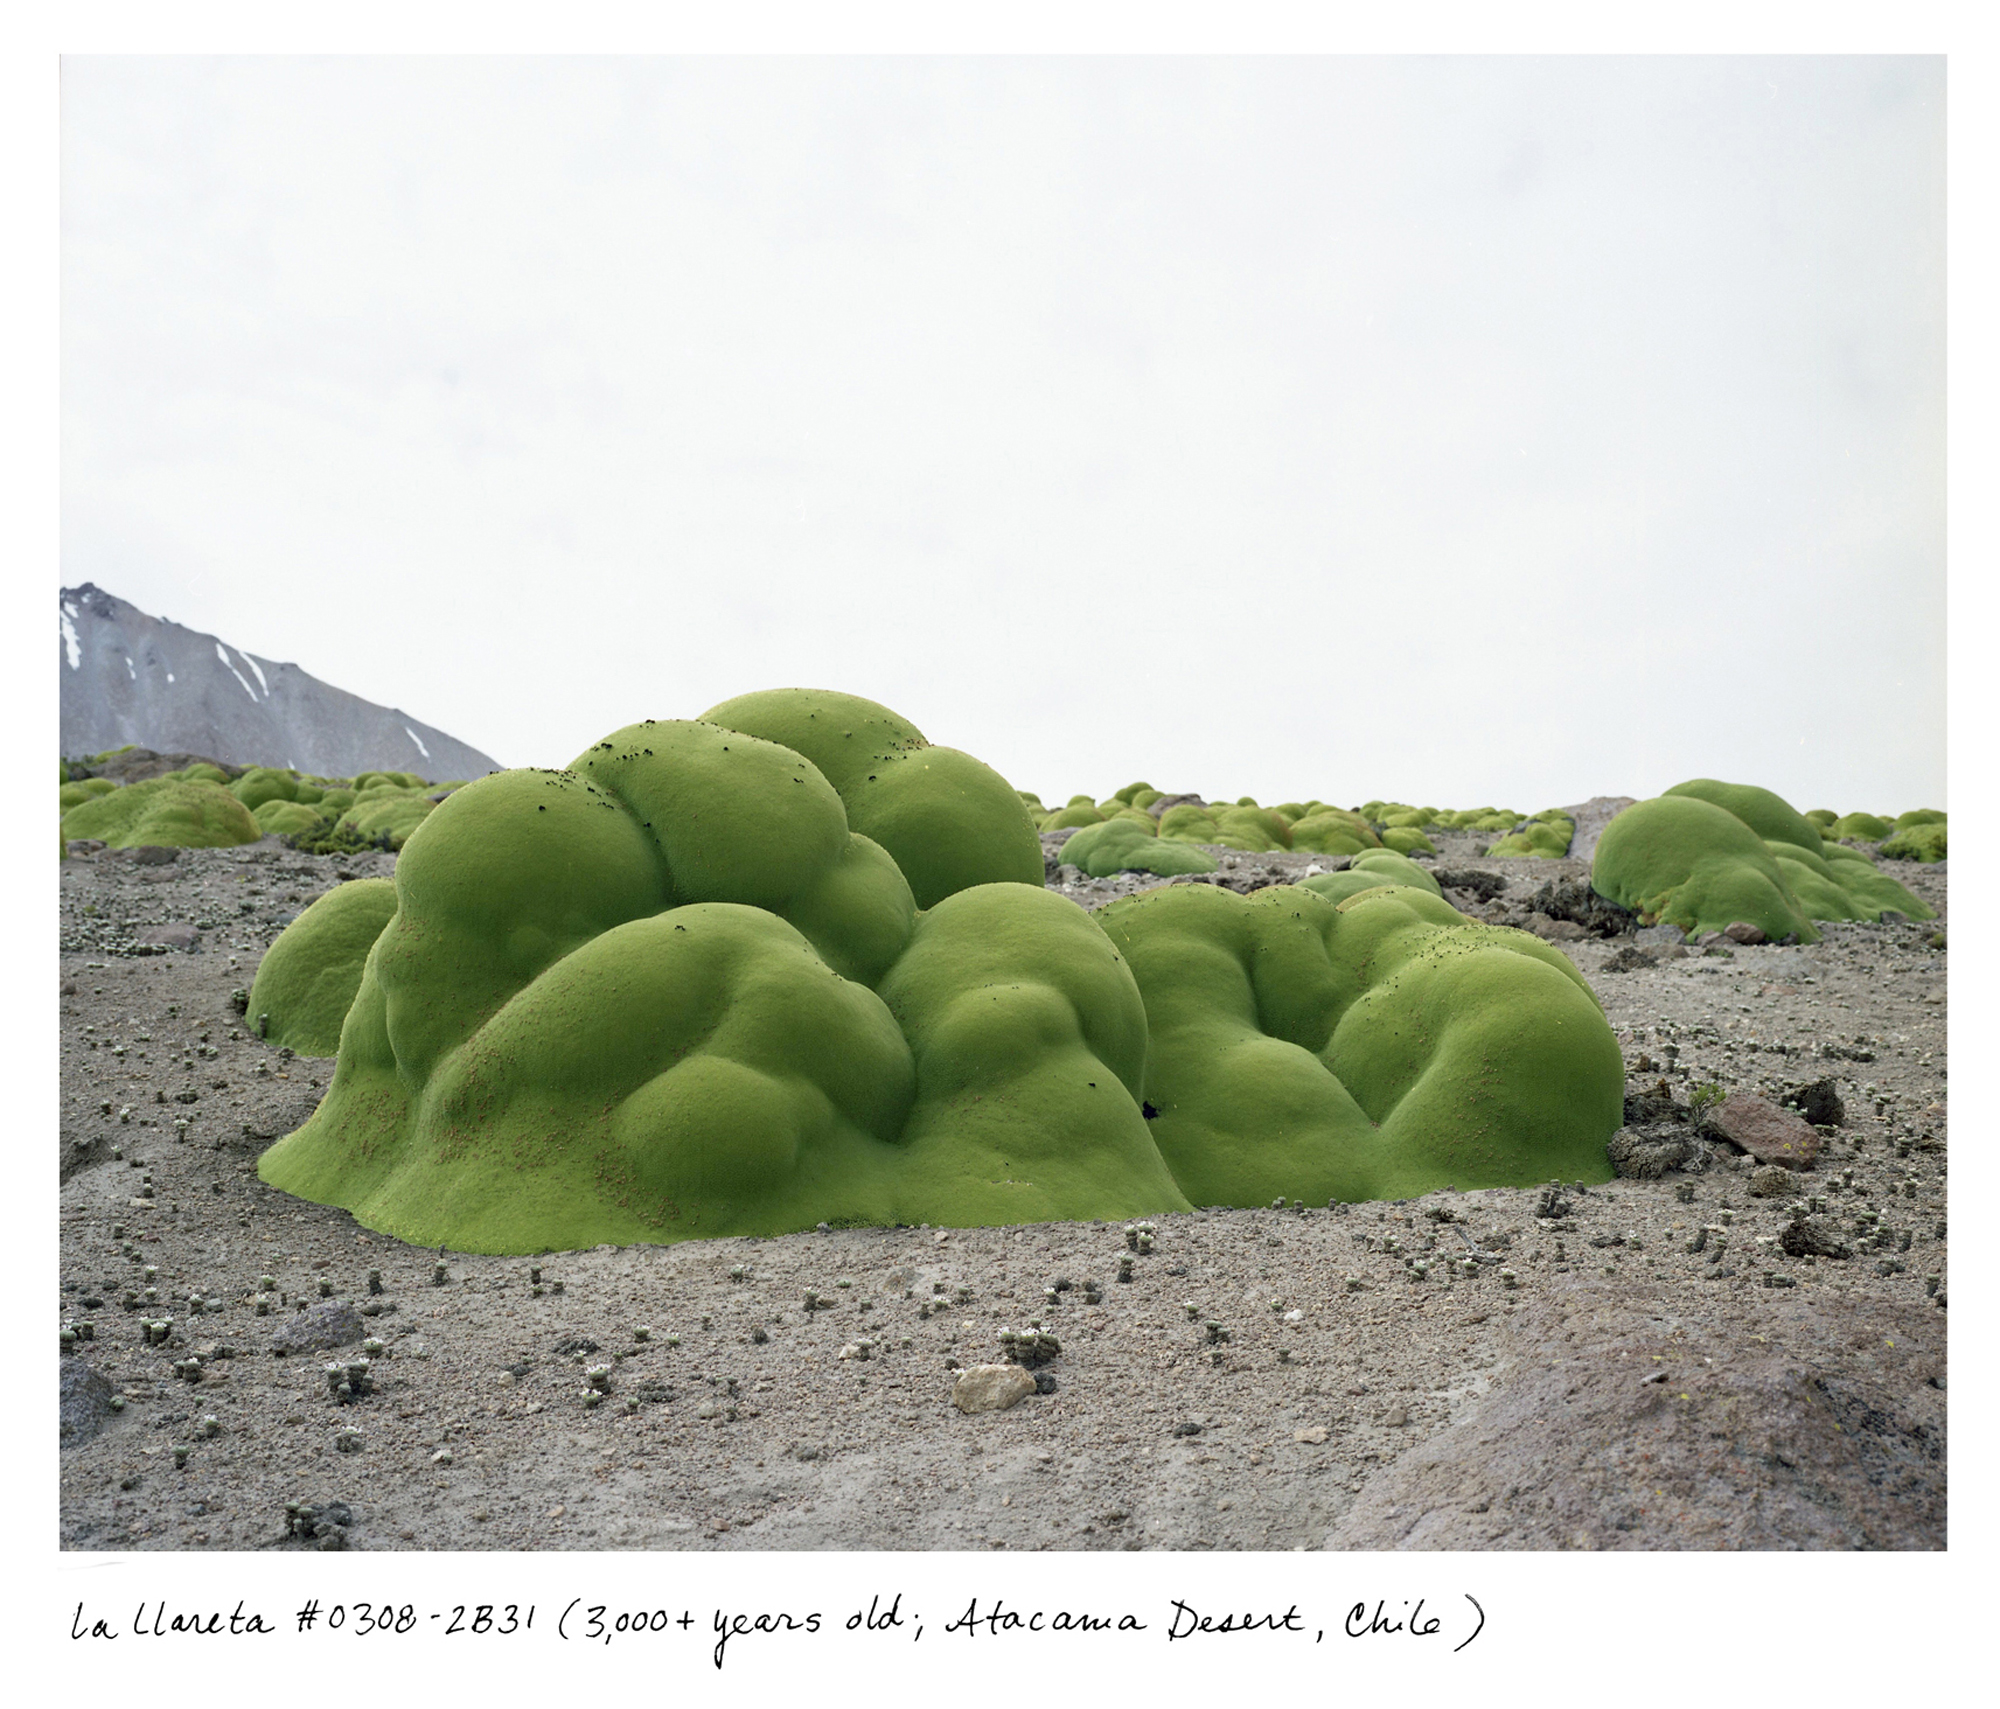 Photograph of a large llareta (yareta) plant amidst several other patches of the plant. The plant has made of several lumps and is a mossy green.